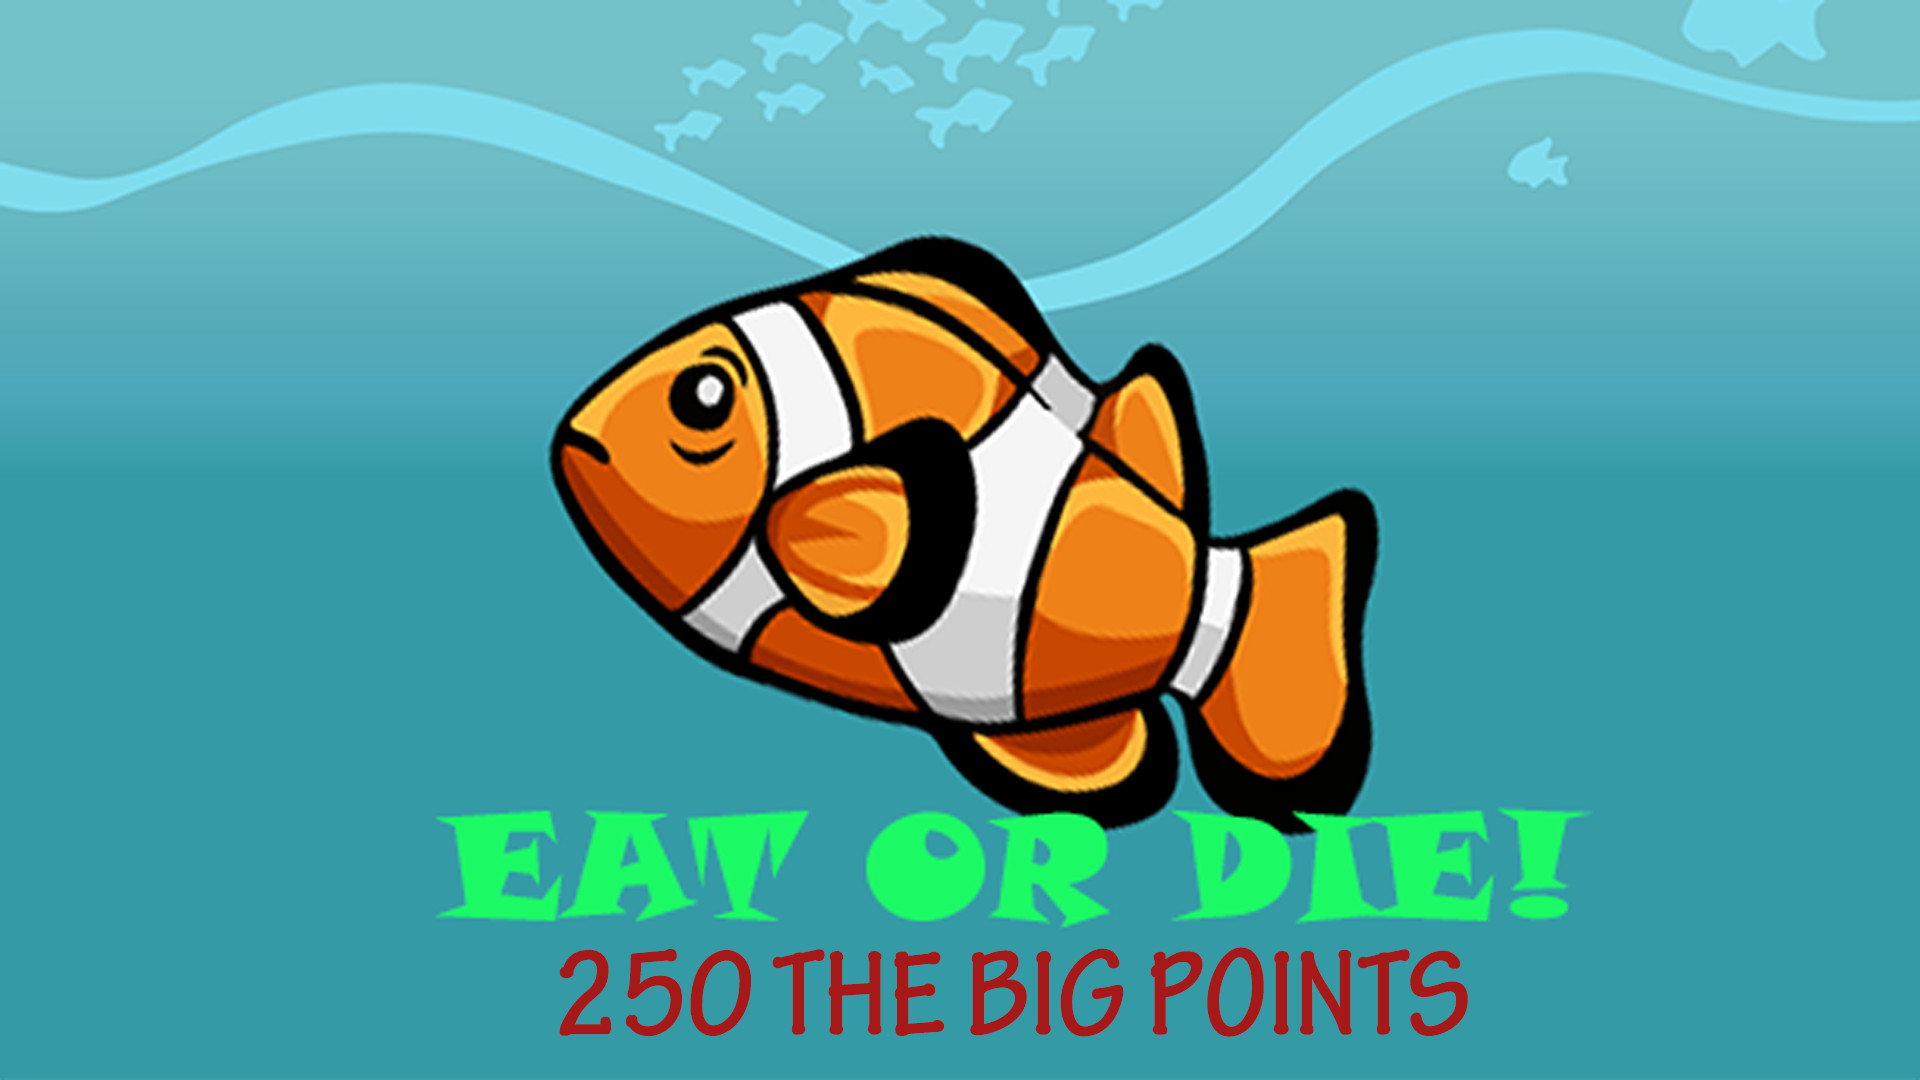 Eat or DIE! - 250 The Big Points Featured Screenshot #1